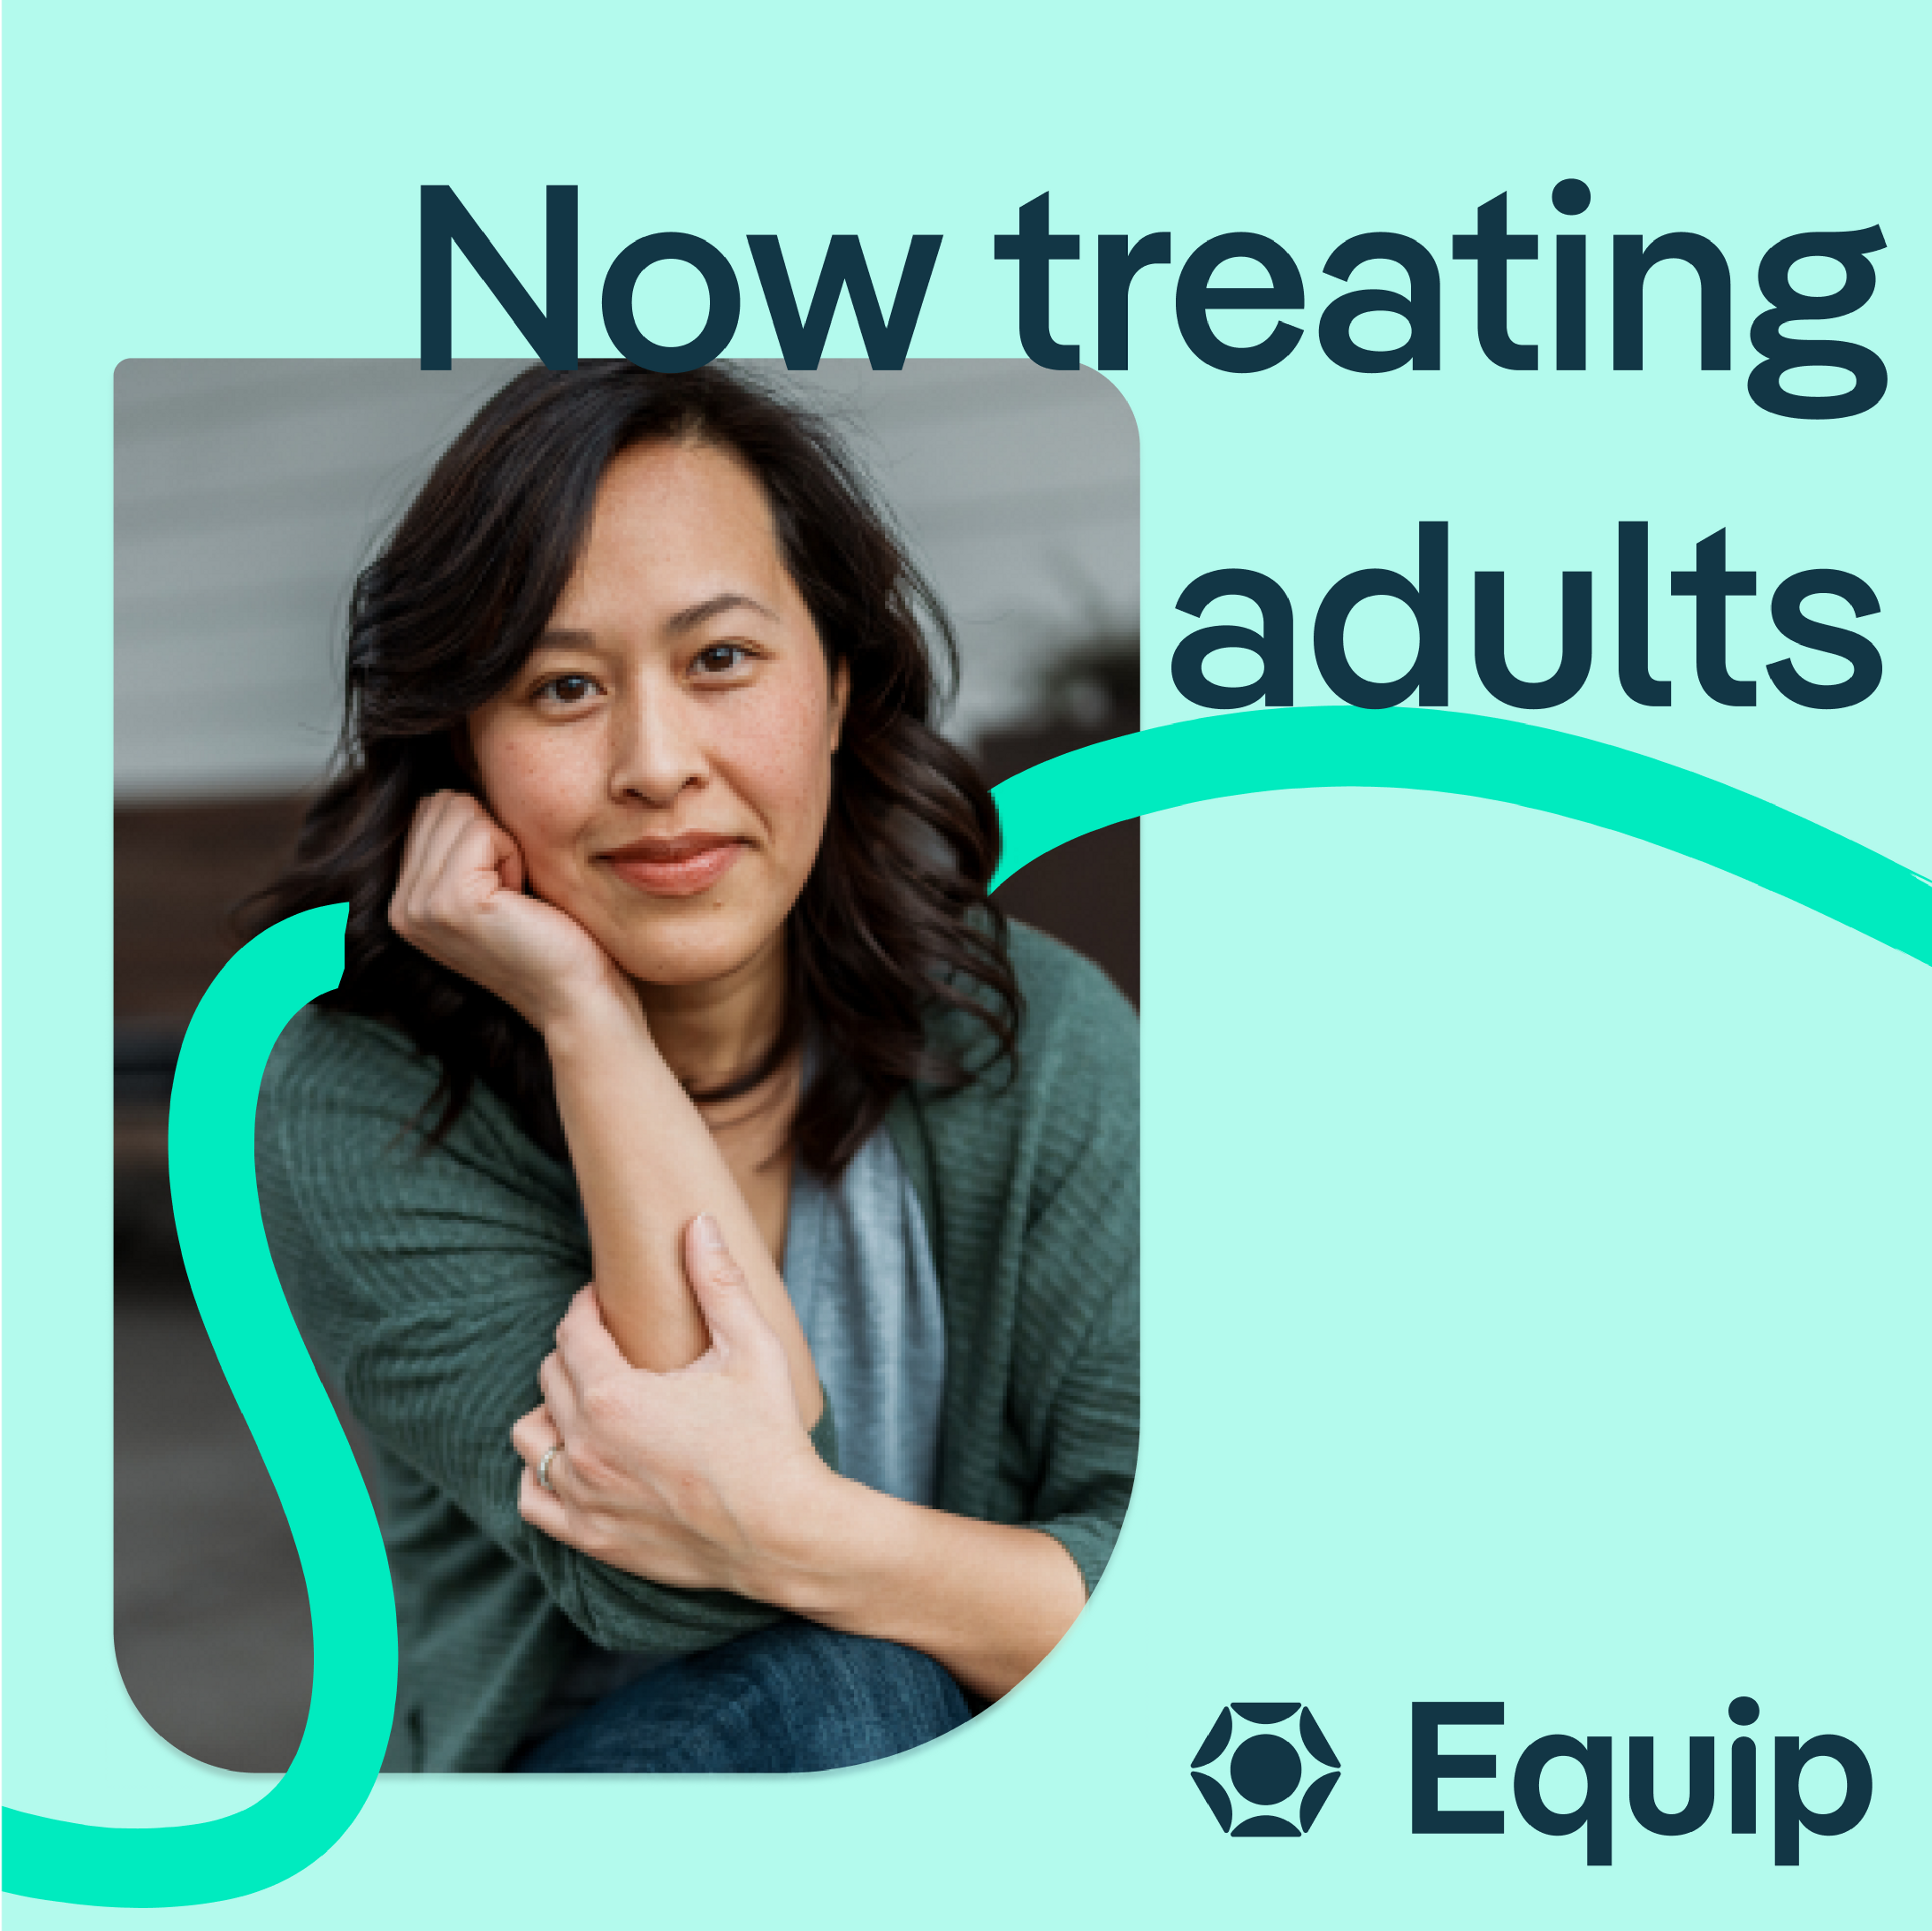 "Now treating adults" picture of woman smiling and Equip non-linear line graphic